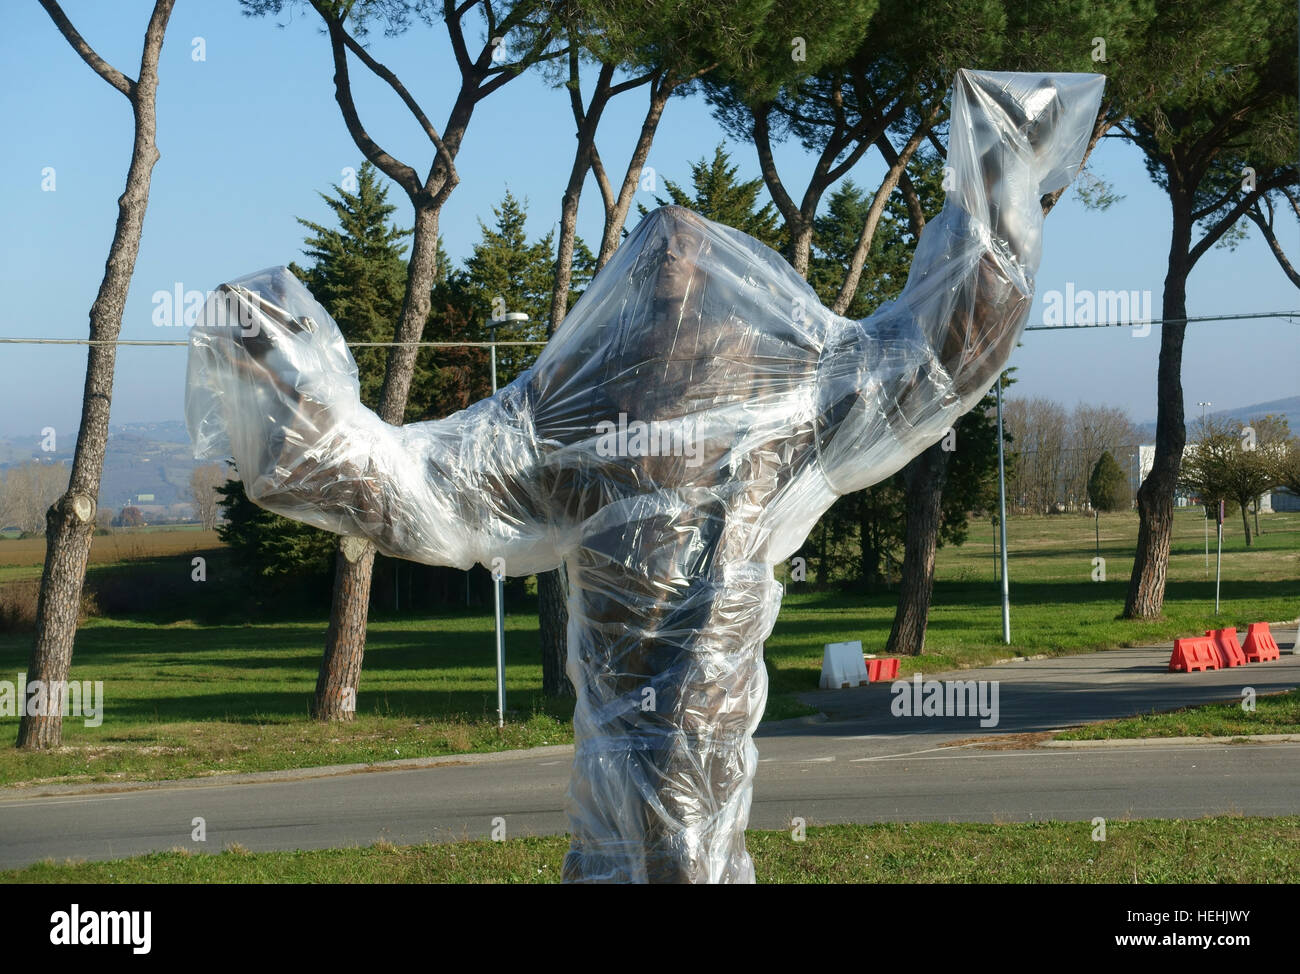 A bronze statue is covered in plastic sheeting outside Perugia airport Stock Photo